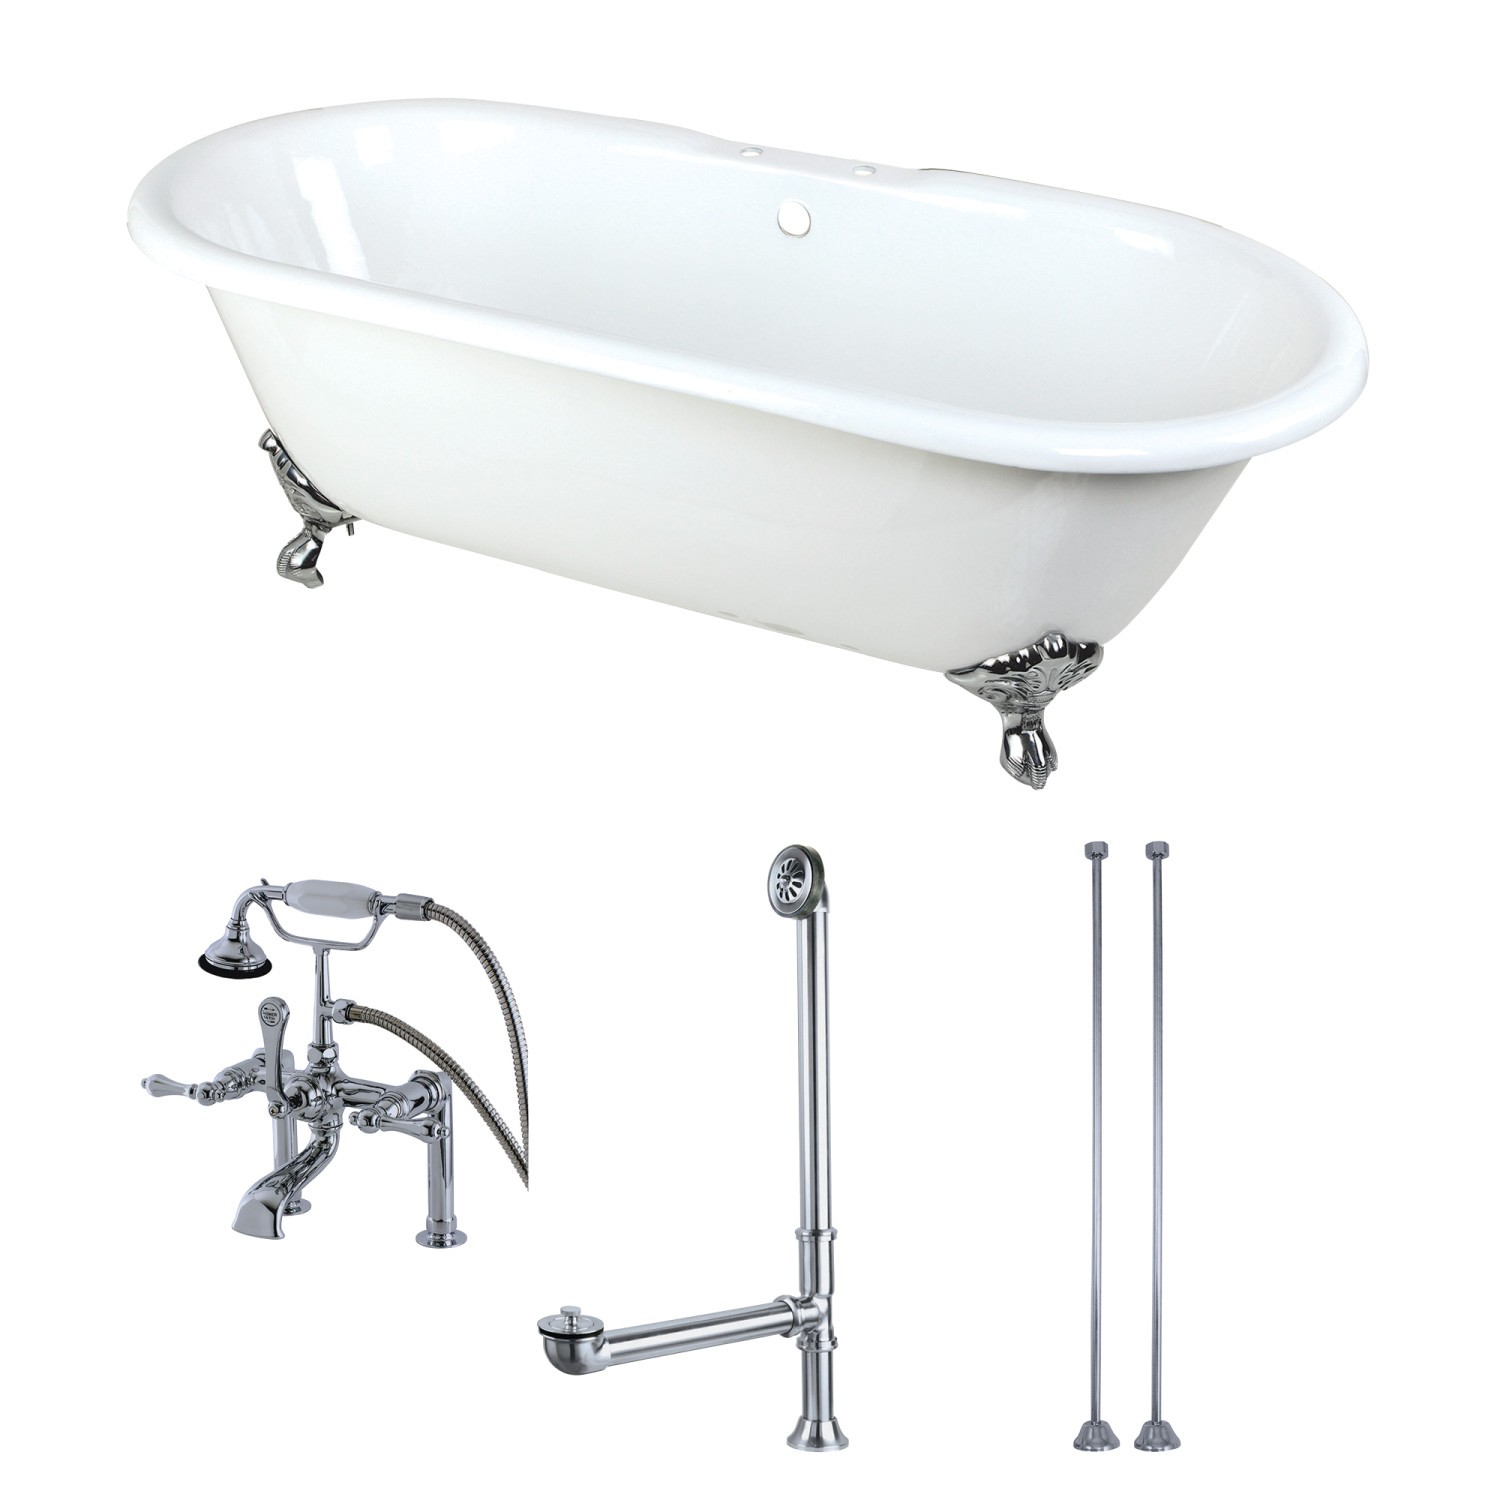 KINGSTON BRASS KCT7D663013C AQUA EDEN 66-INCH CLAWFOOT TUB WITH FAUCET DRAIN AND LINES COMBO